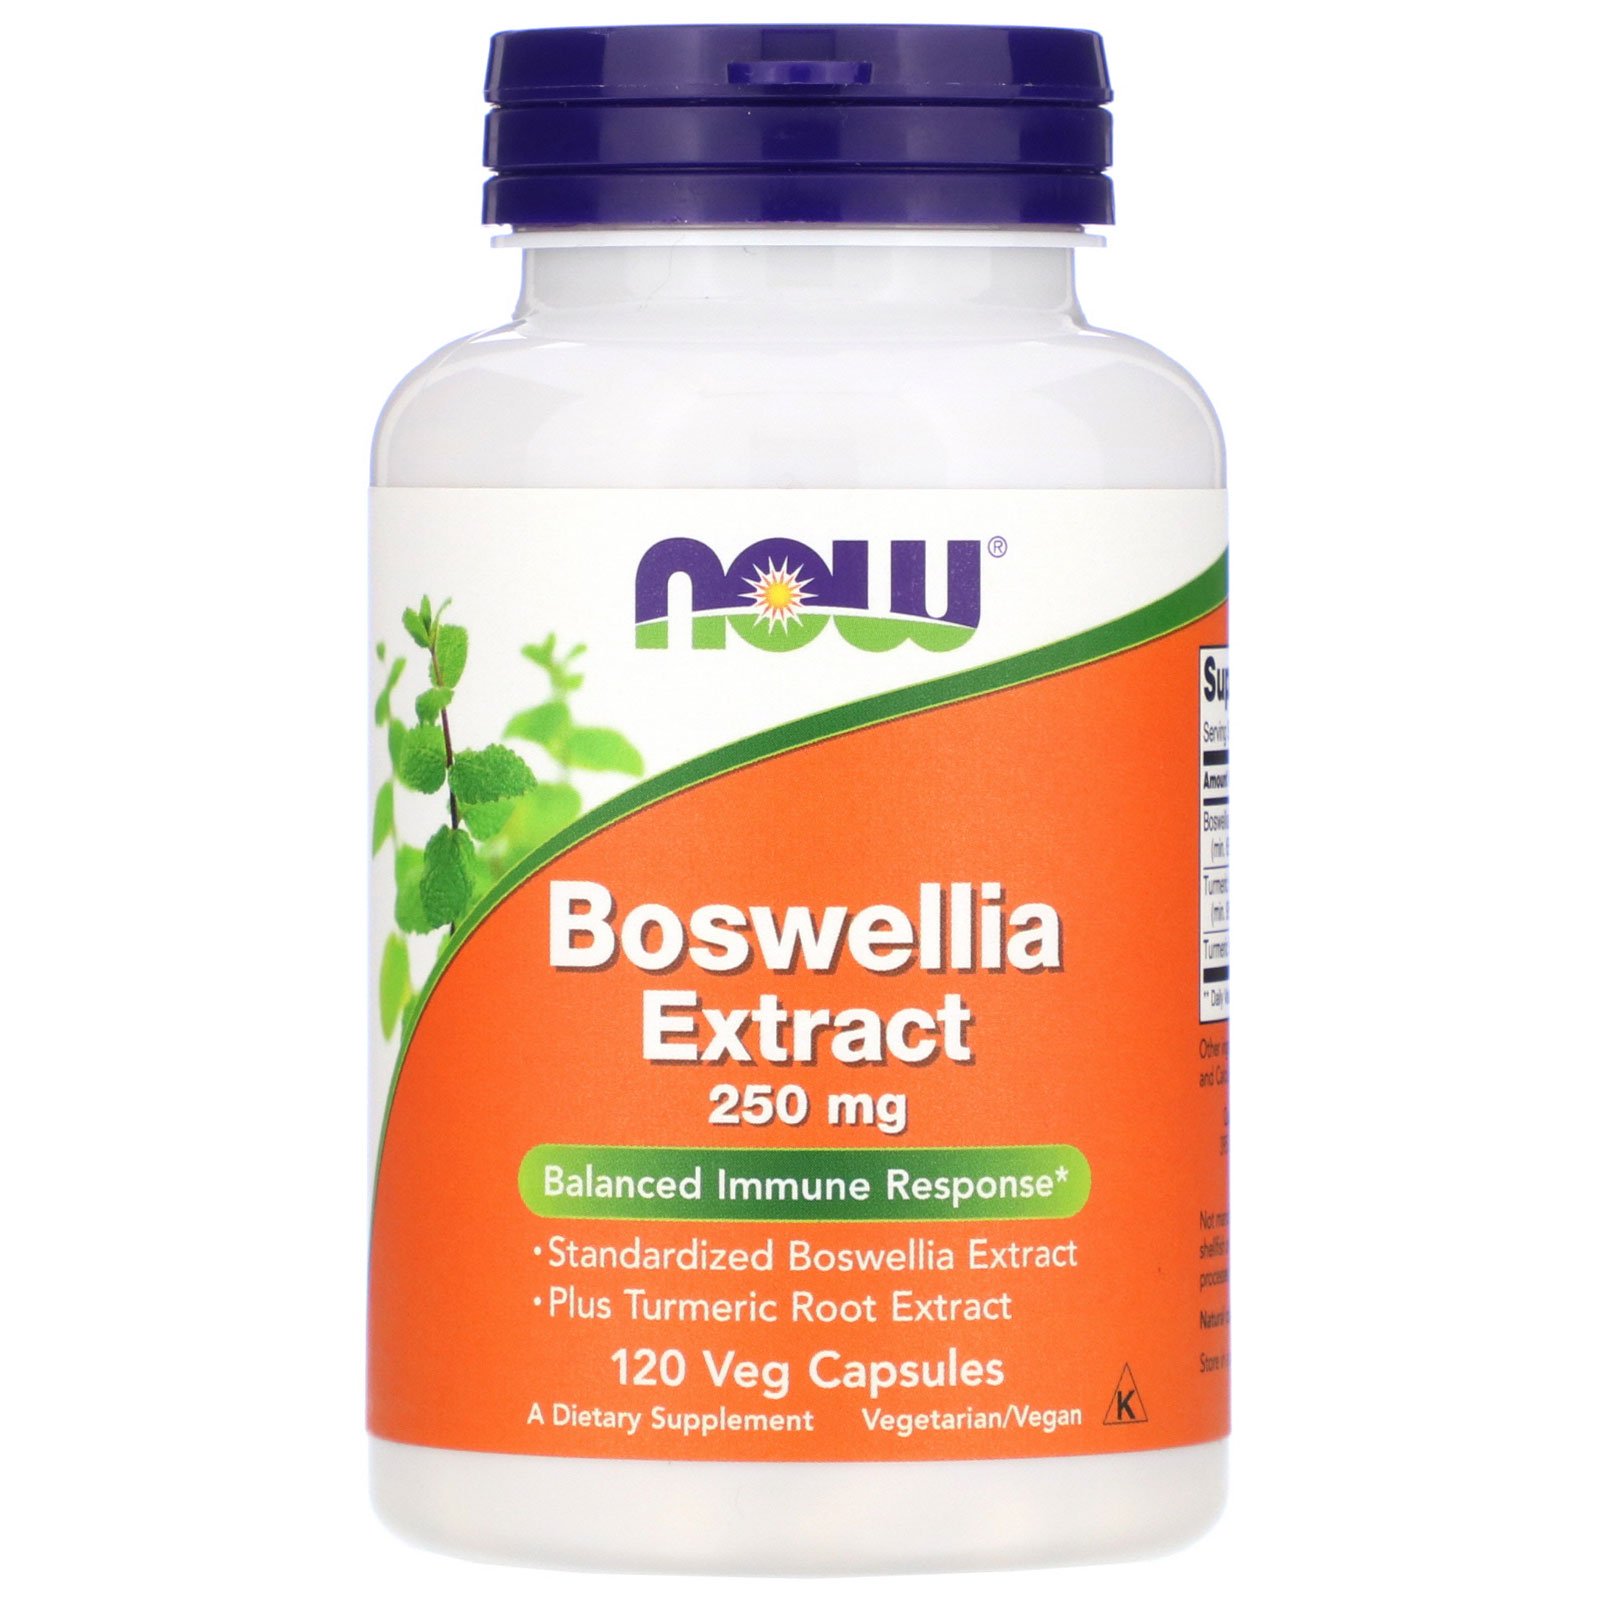 NOW Boswellia Extract, Босвеллия Экстракт 250 мг - 120 капсул